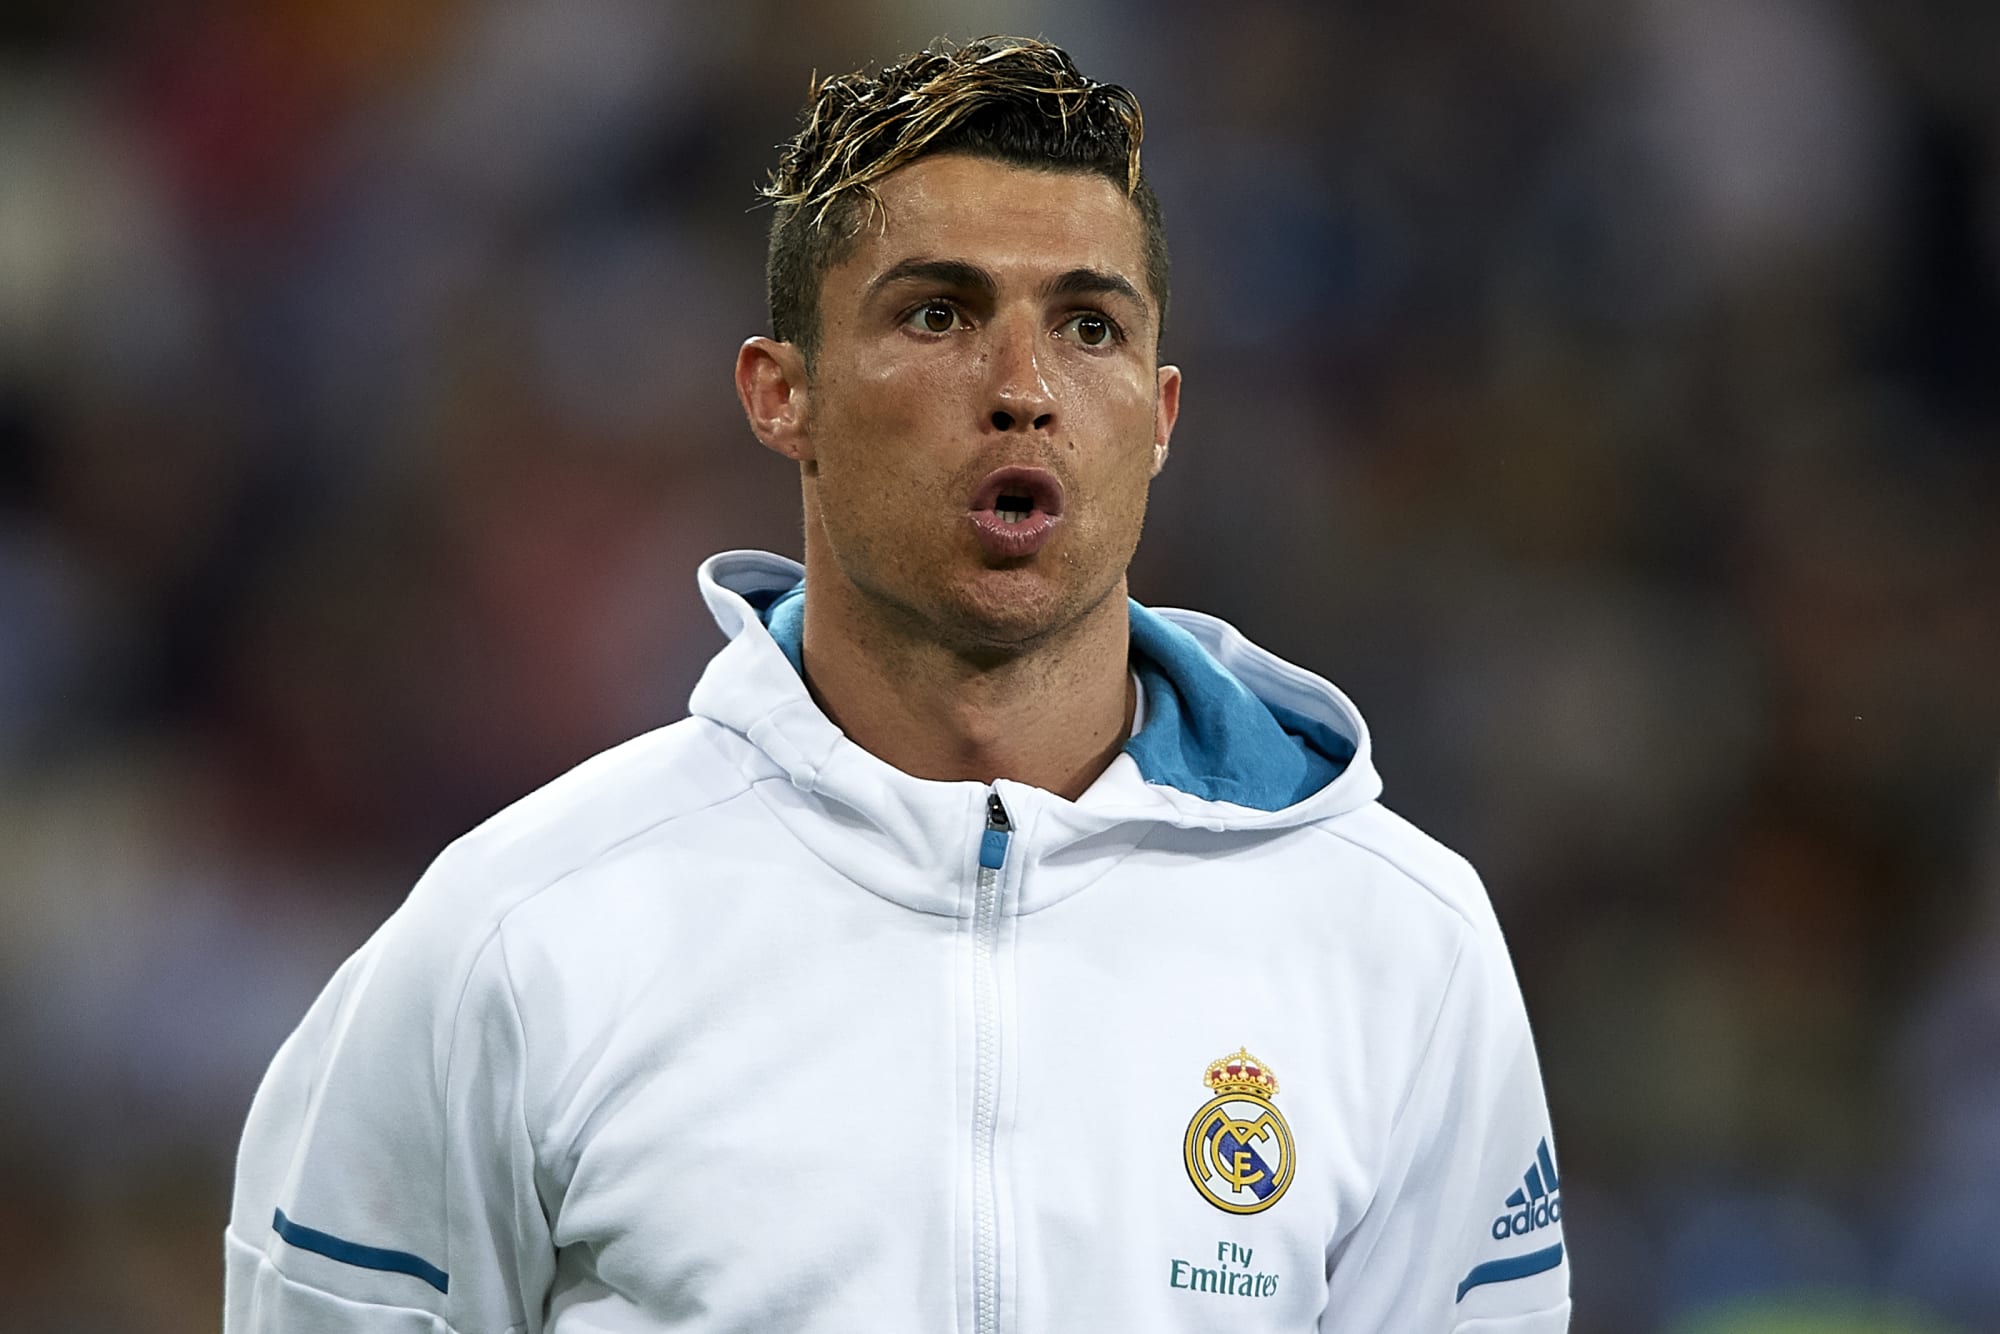 Cristiano Ronaldo to receive new Real Madrid contract before World Cup